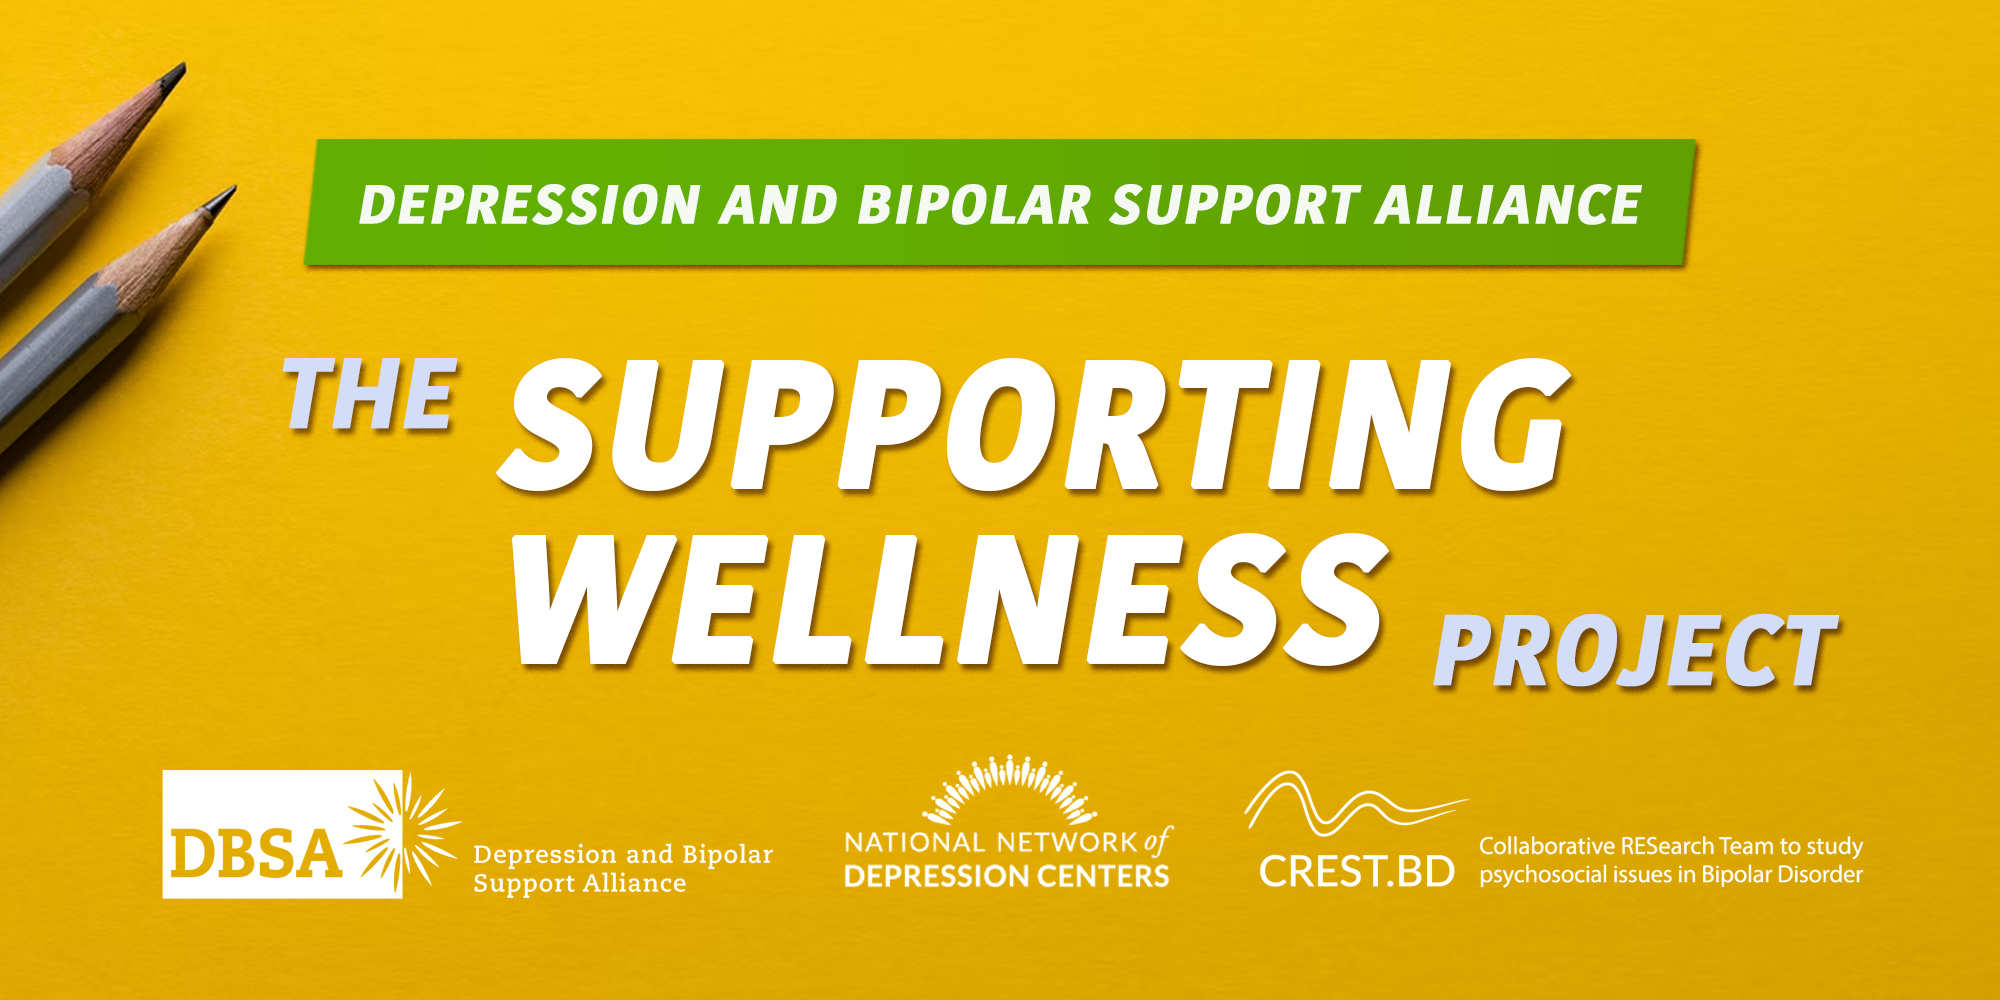 Living well with a mood disorder: the DBSA’s “Supporting Wellness” project